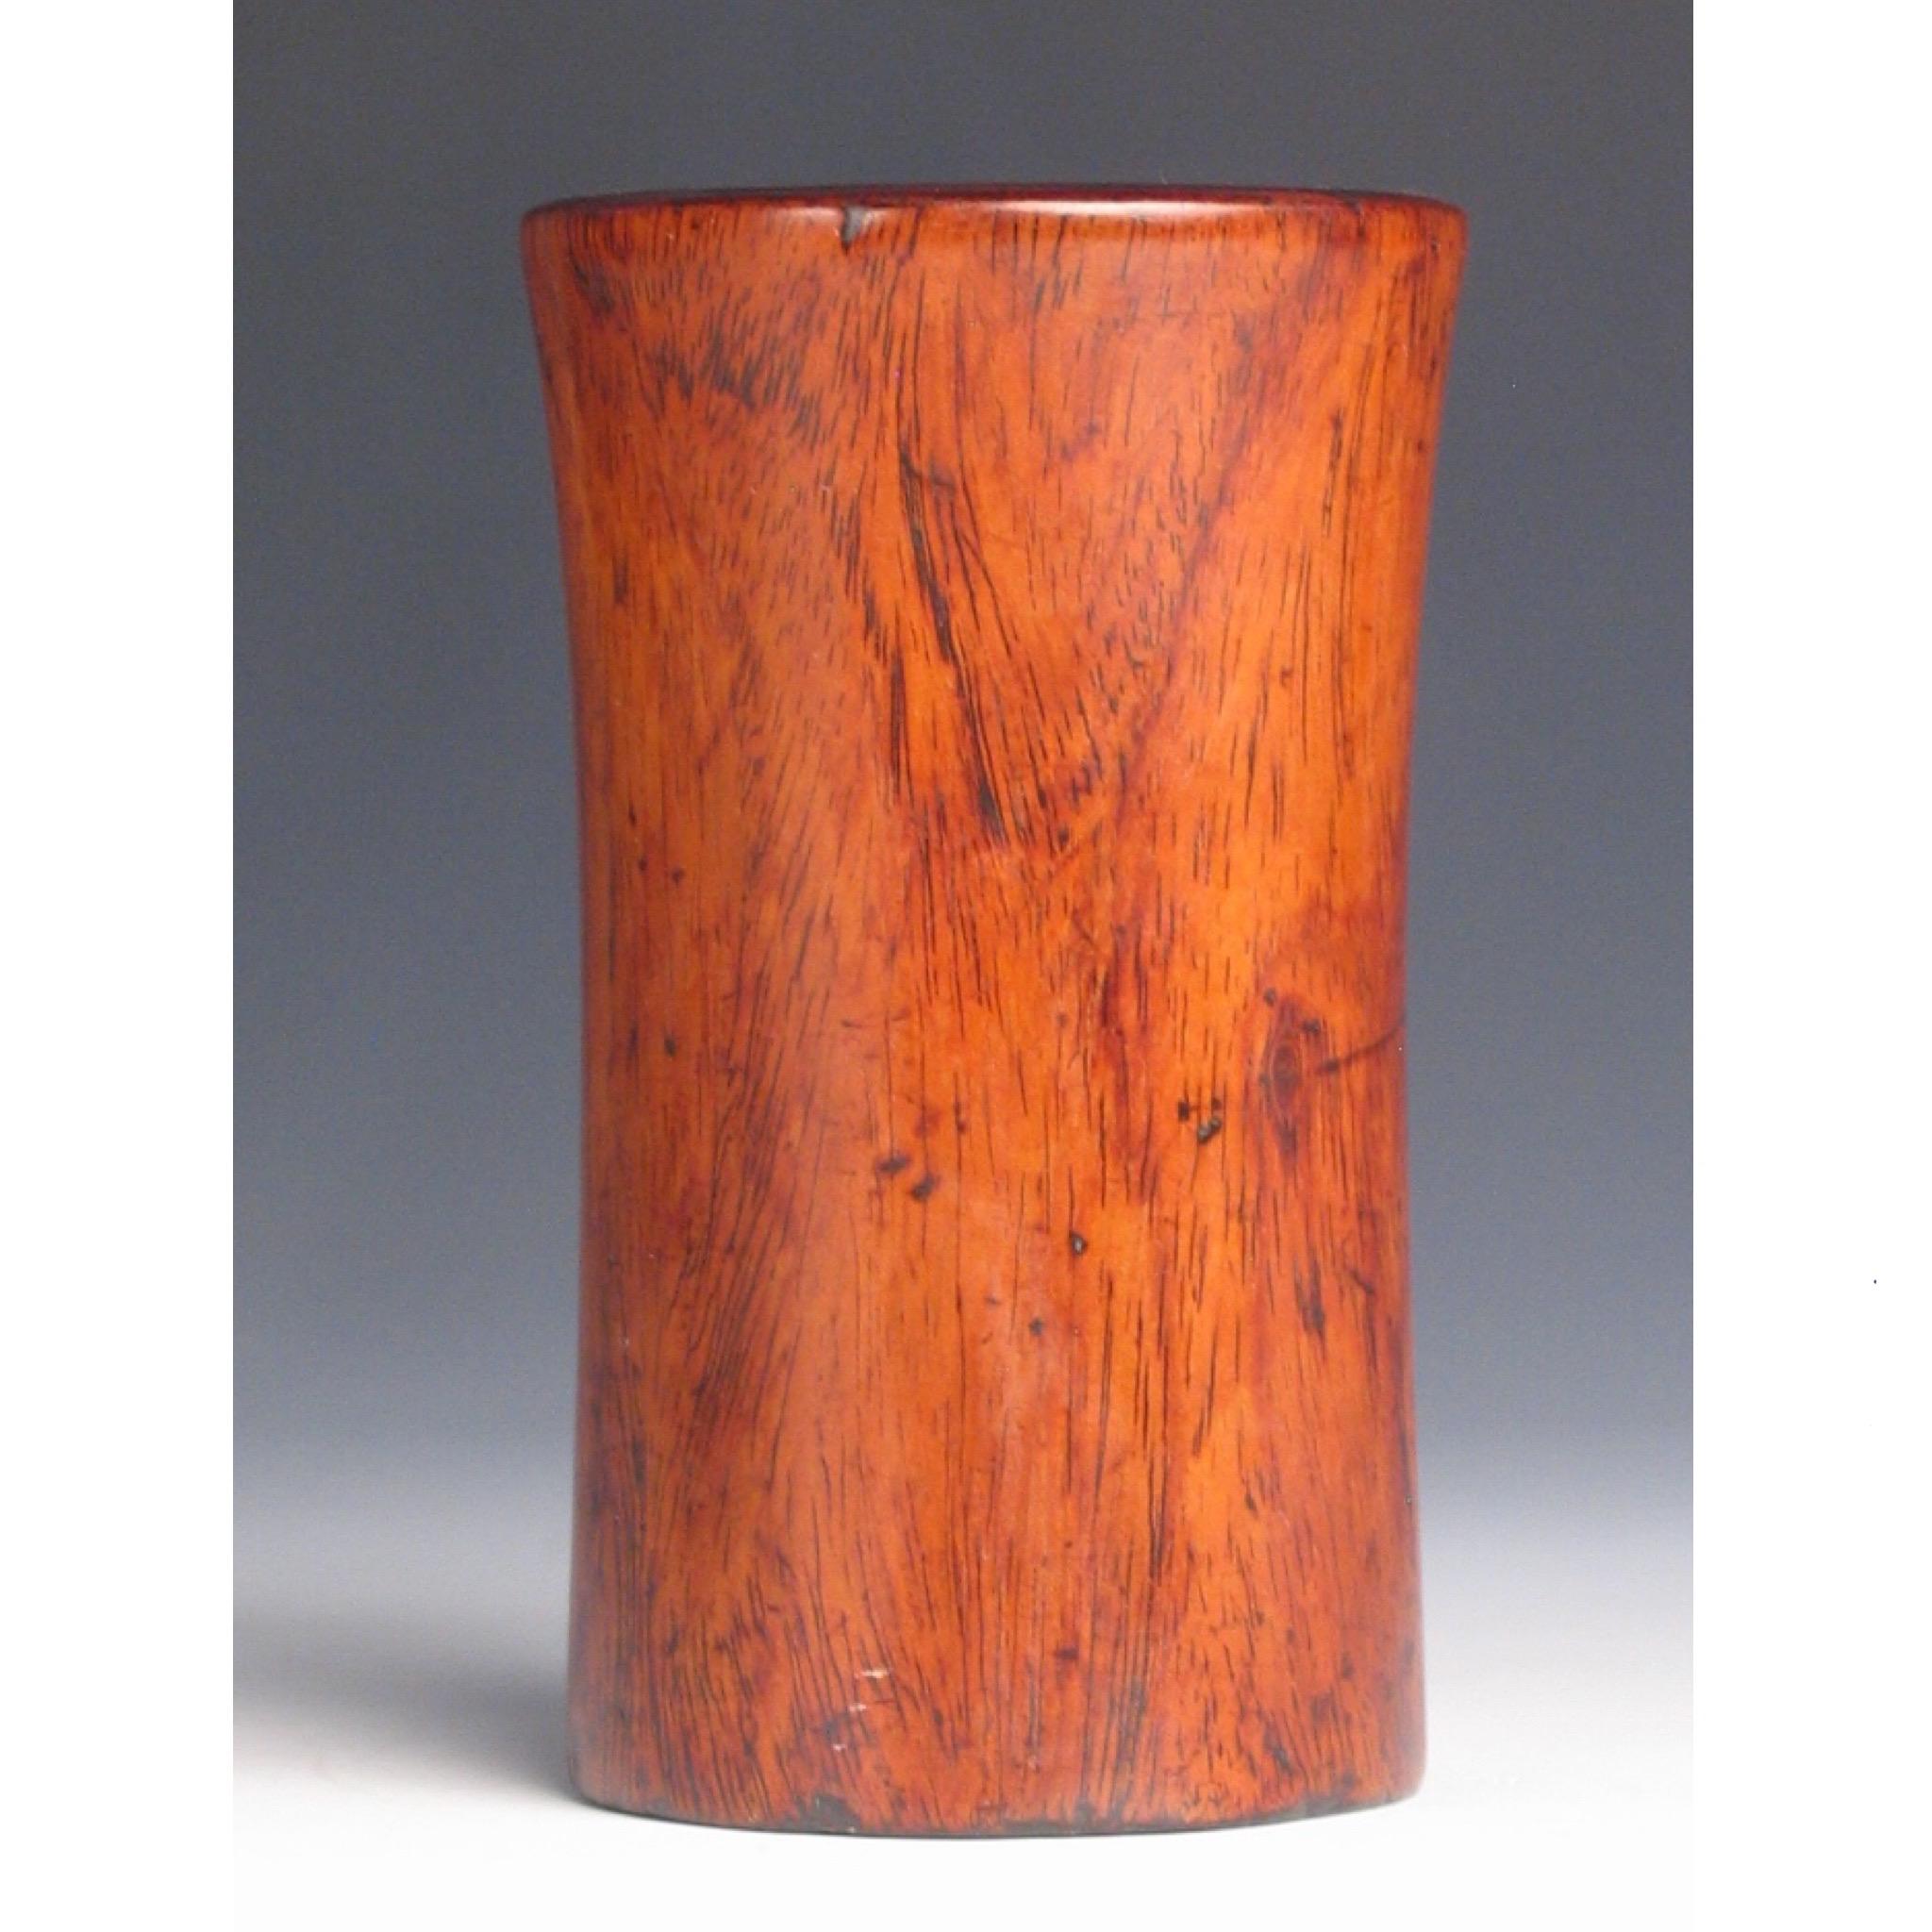 Chinese Huanghuali Brush Pot, Bitong, an elegant simple form, well carved from one honey coloured and nicely figured limb of huanghuali (Dalbergia Odorifera) hardwood, carved as a thin walled cylinder (5/16” thick and 3-1/8”deep) with slight flared